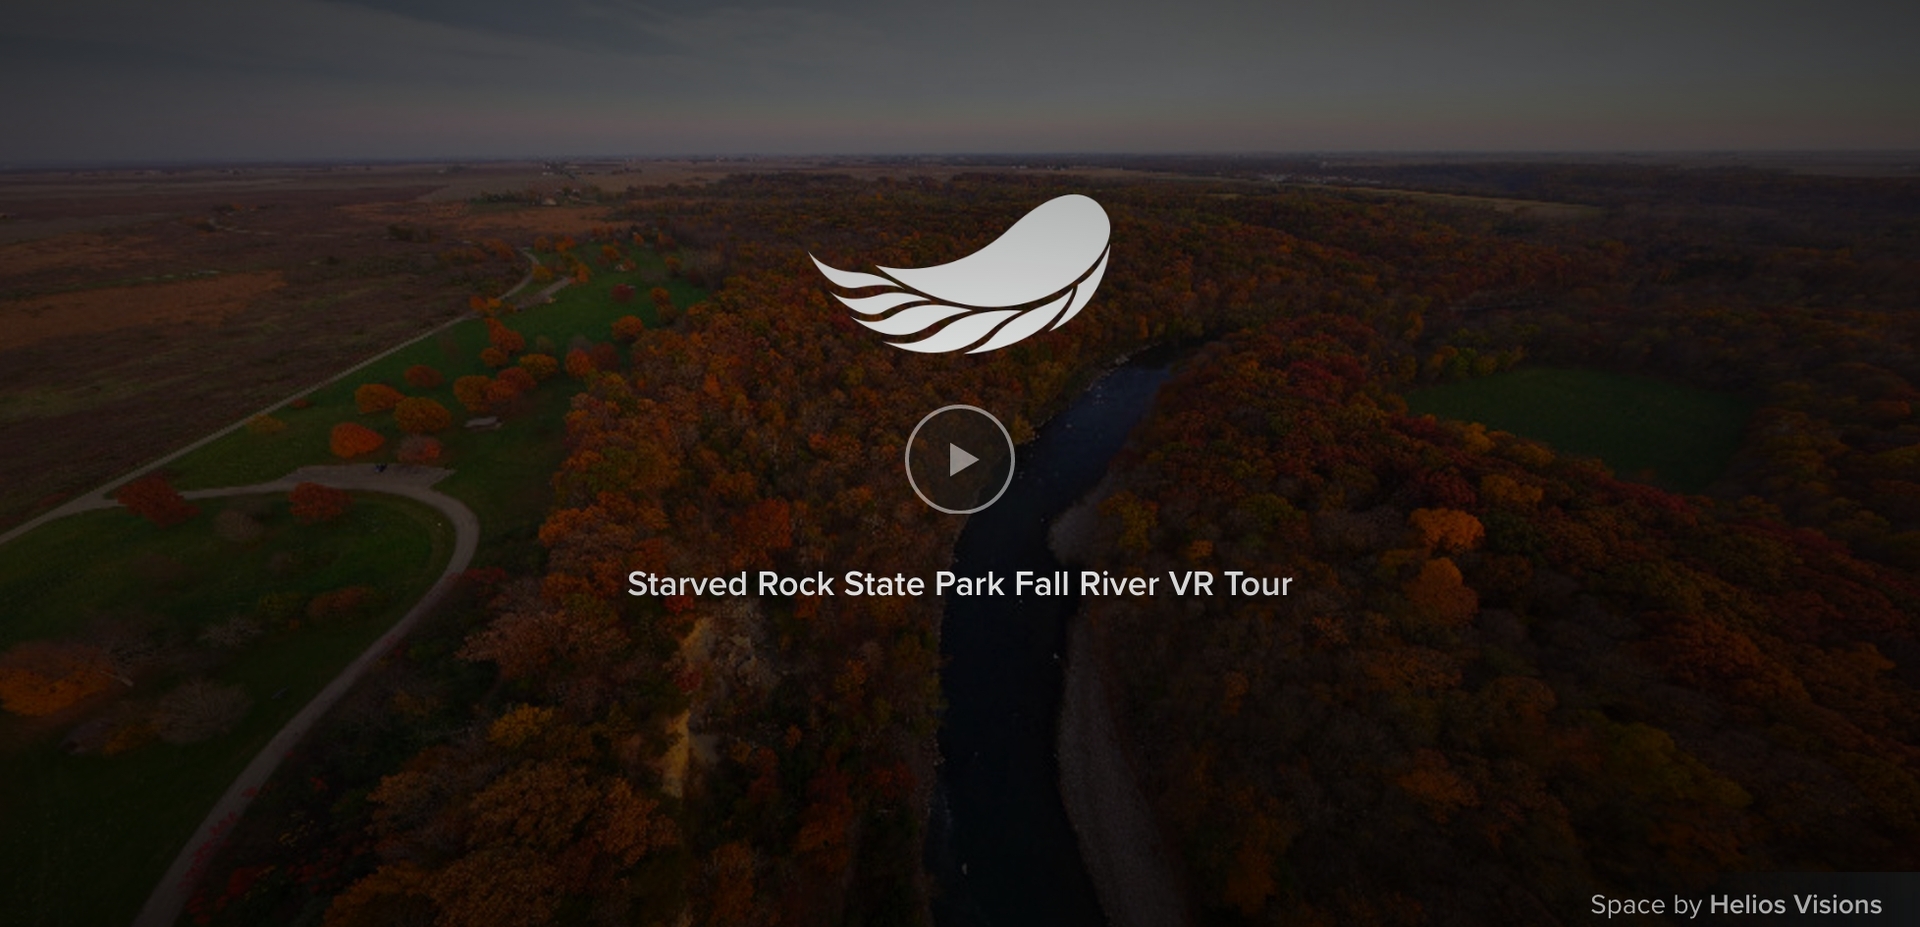 Starved Rock Illinois River Valley Fall Tour – Virtual Reality(VR) 360 Tour